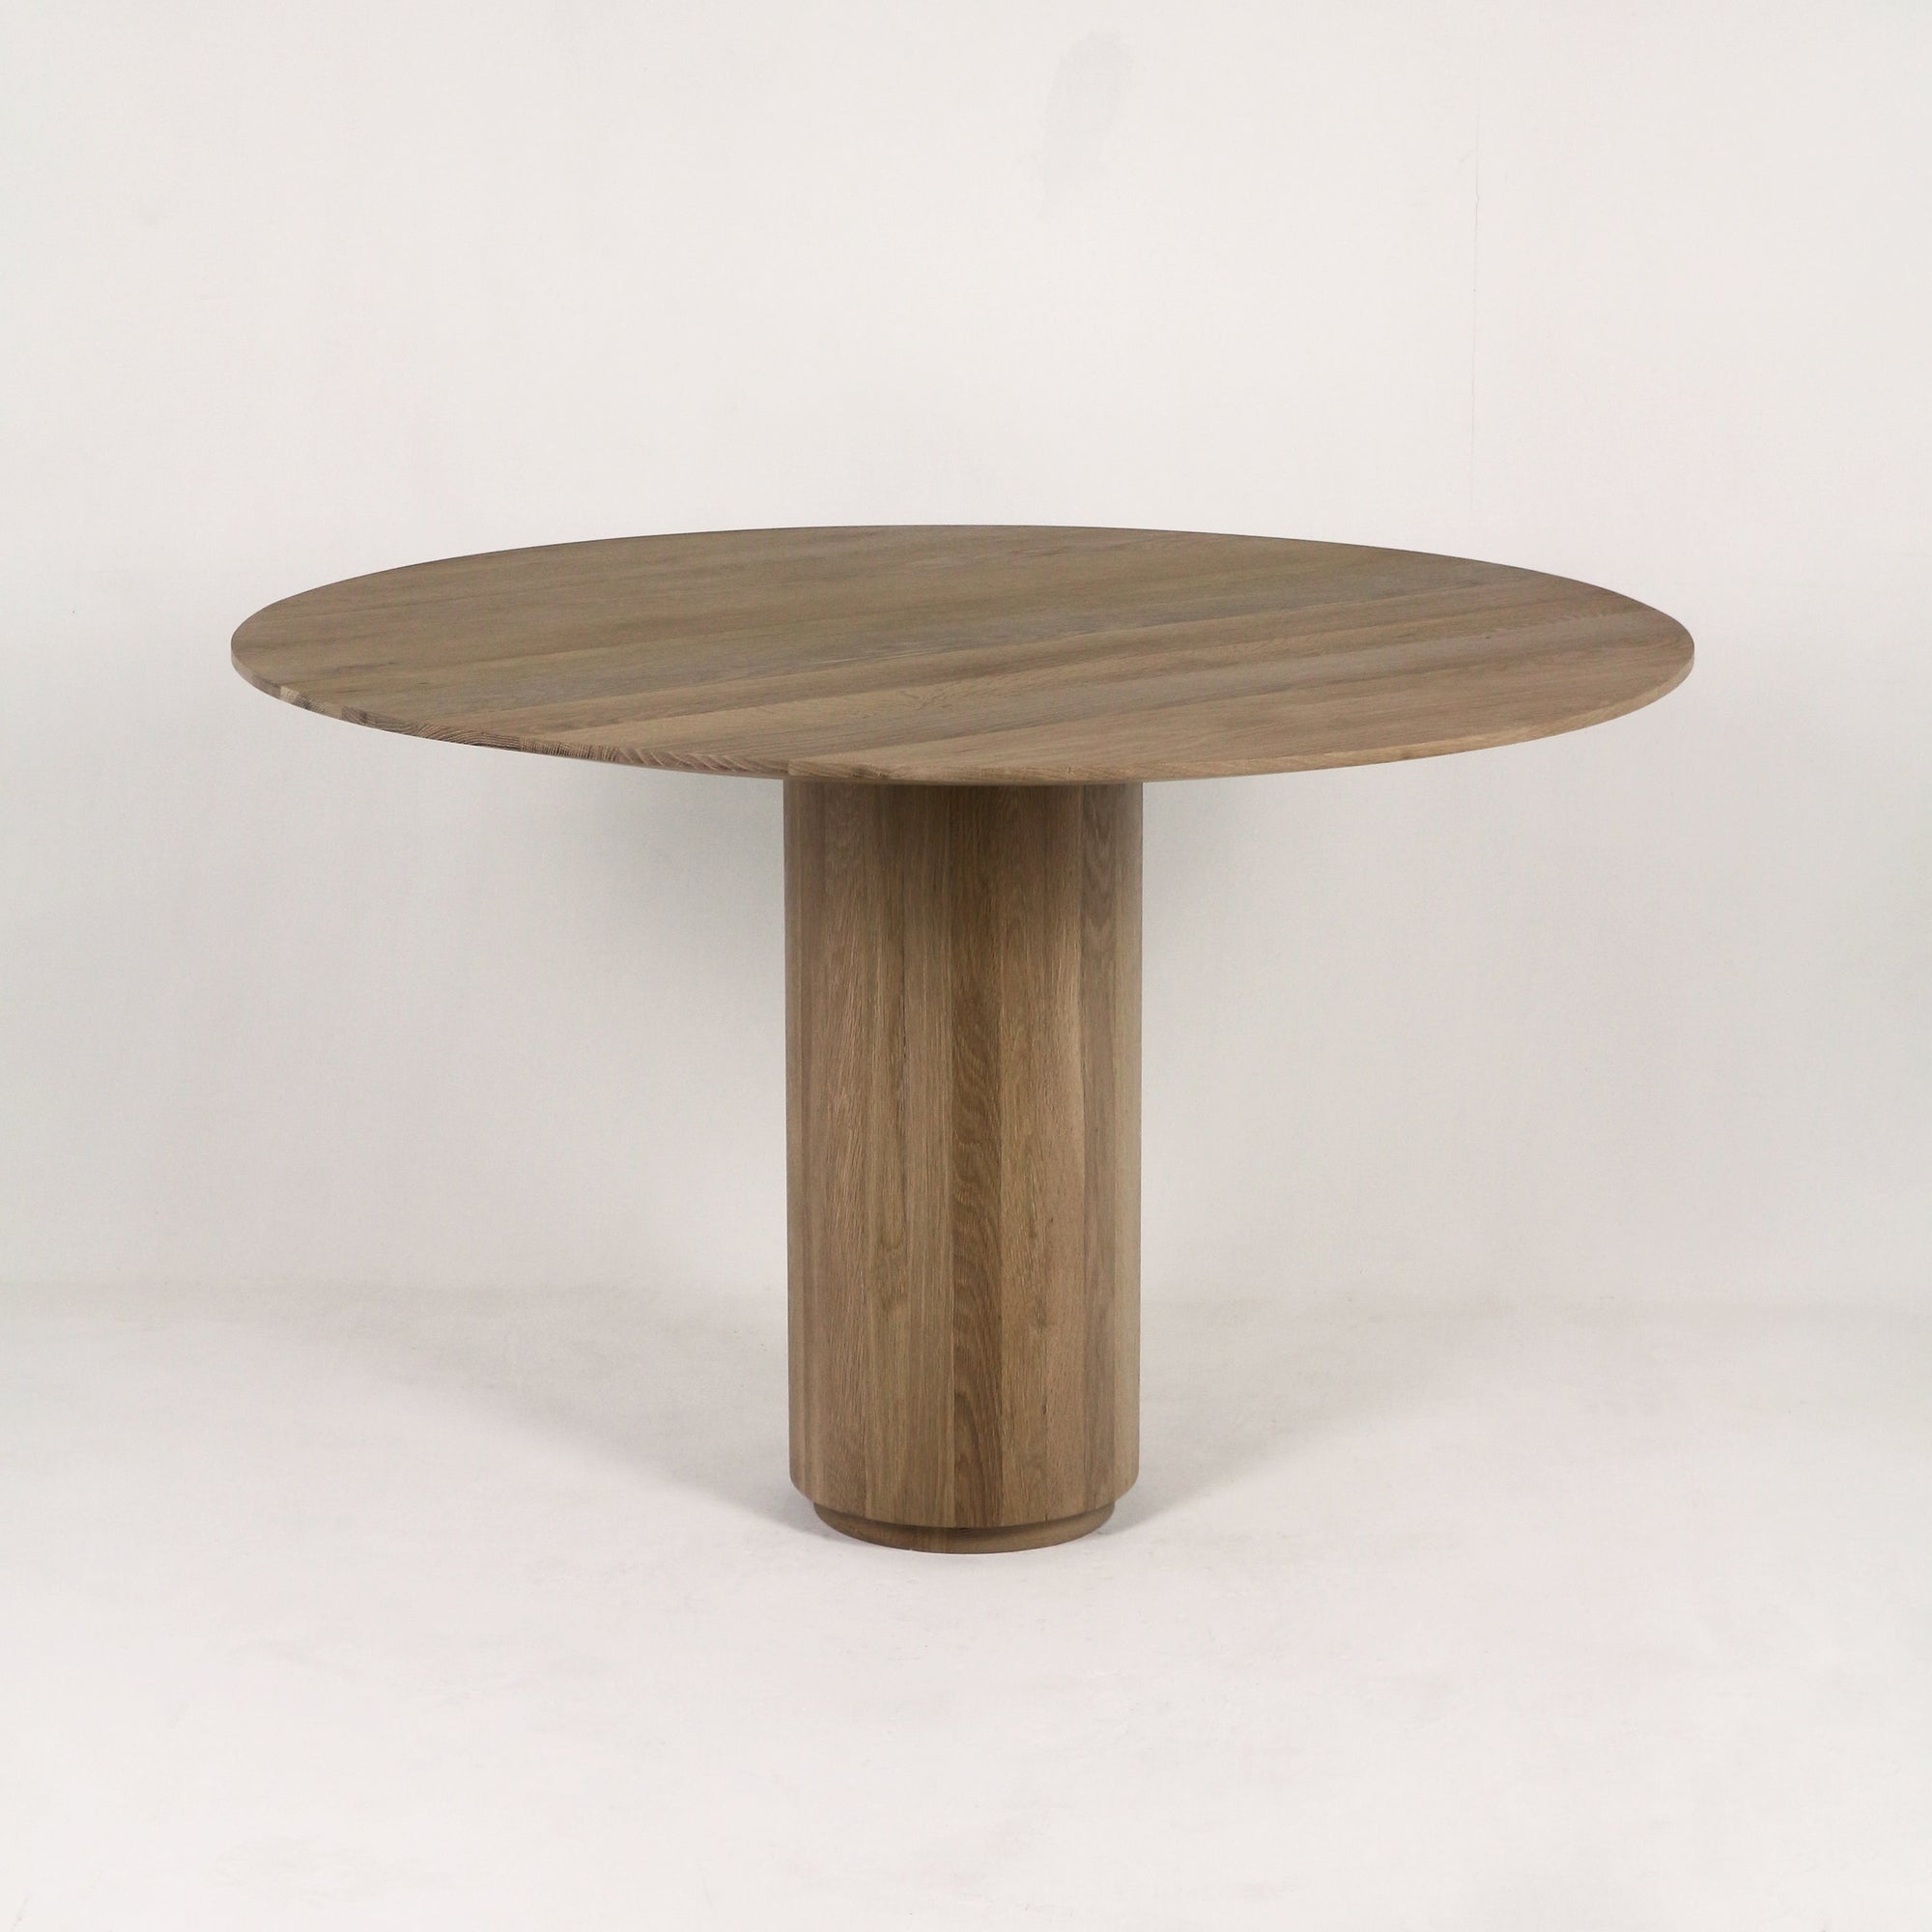 Royal Dining Table in Natural Teak Finish